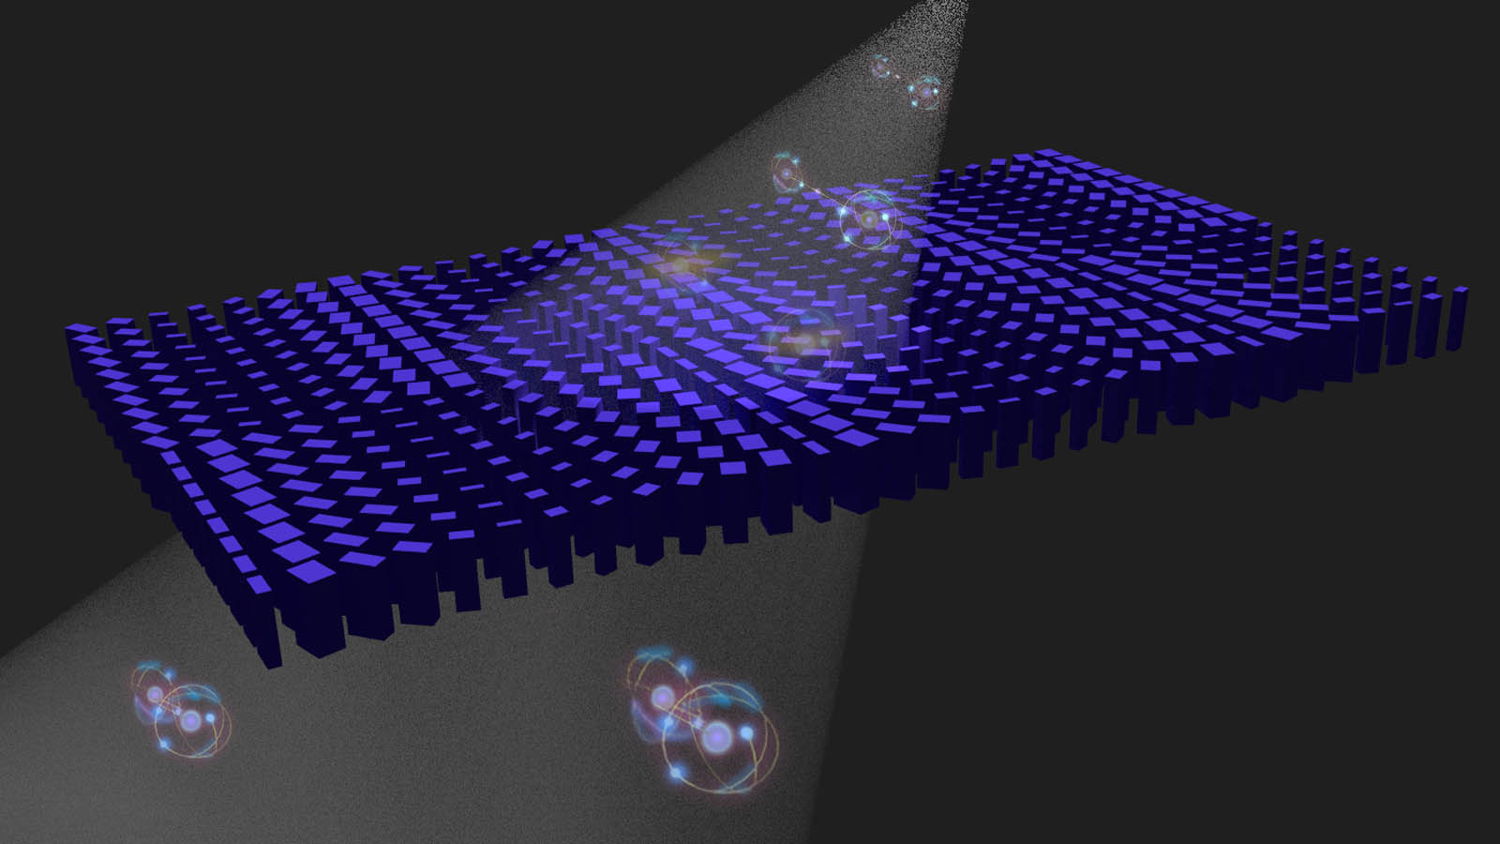 Artist's impression of the meta surface camera lens to image several quantum particles of light at once. Image credit: Kai Wang